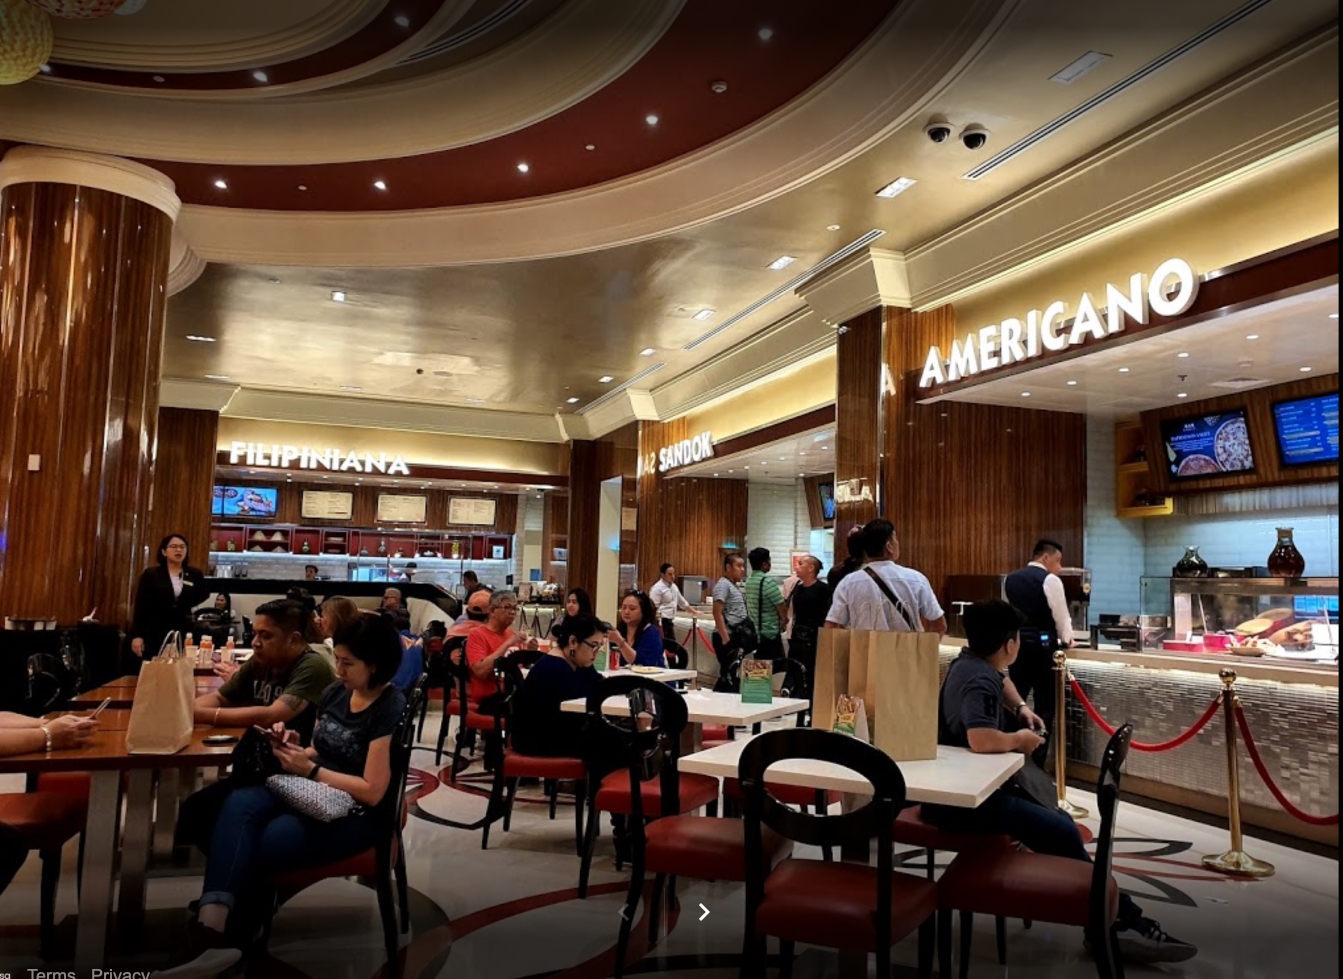 Solaire Food Court's 6 stalls for an international dining experience